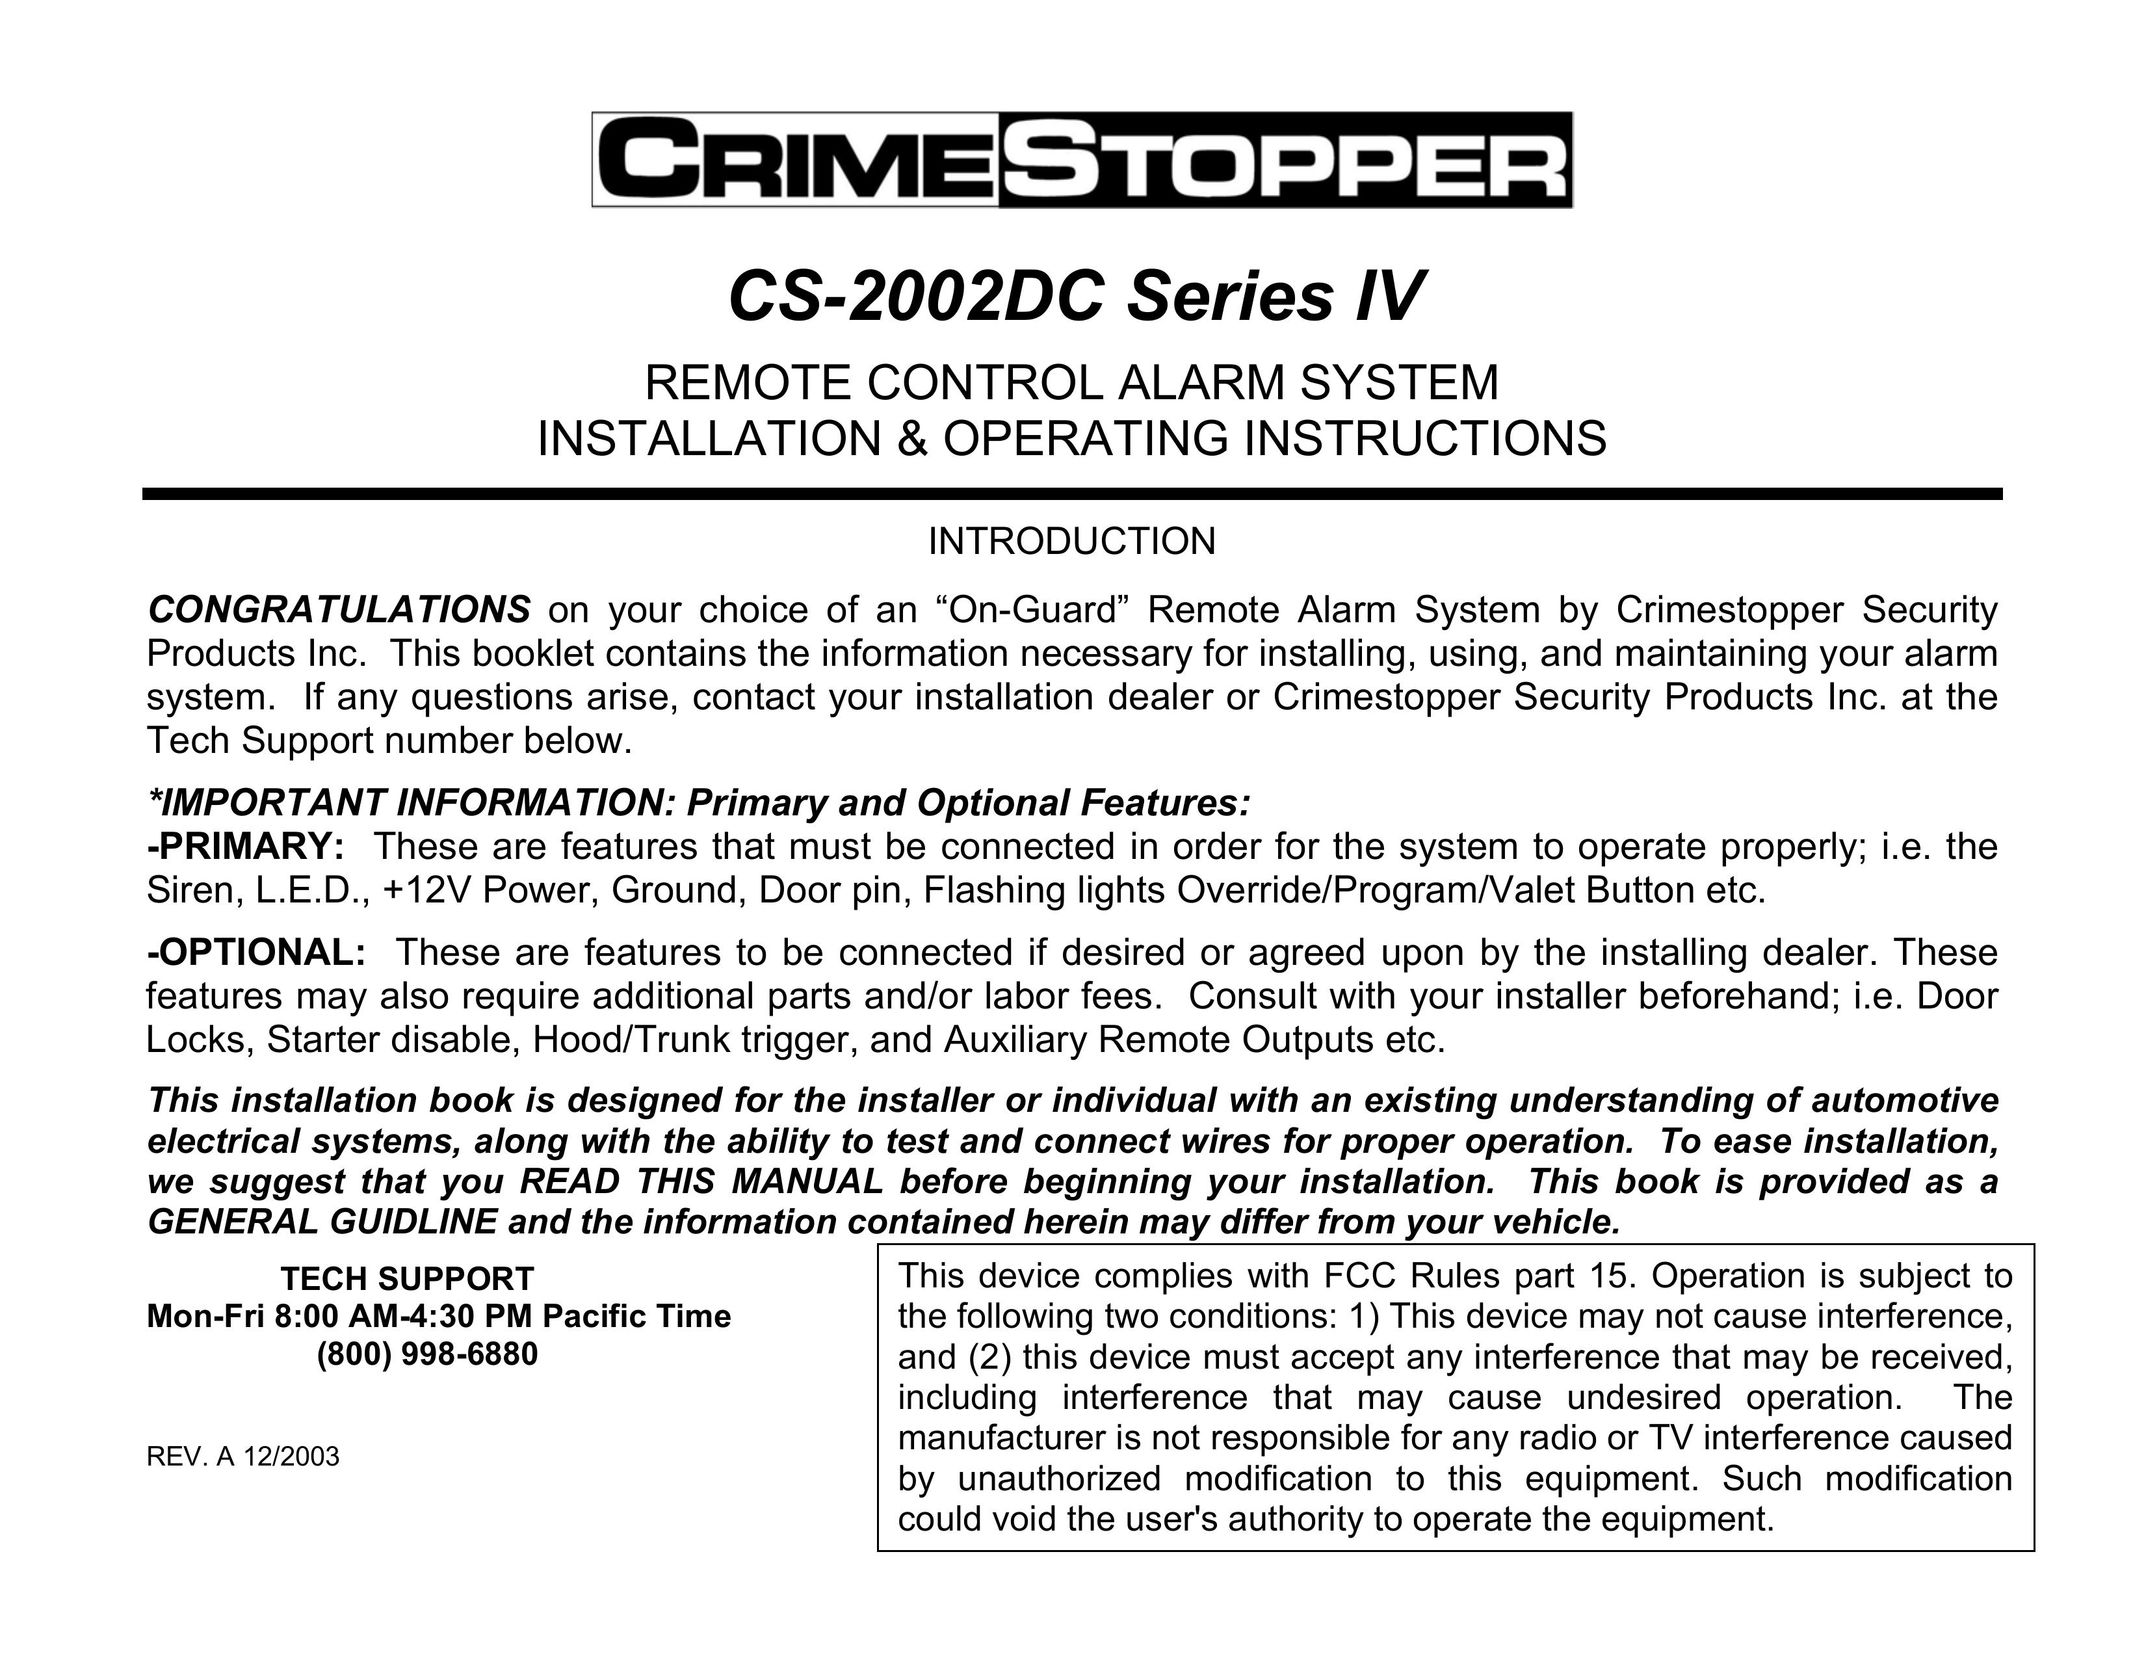 Crimestopper Security Products CS-2002DC Home Security System User Manual